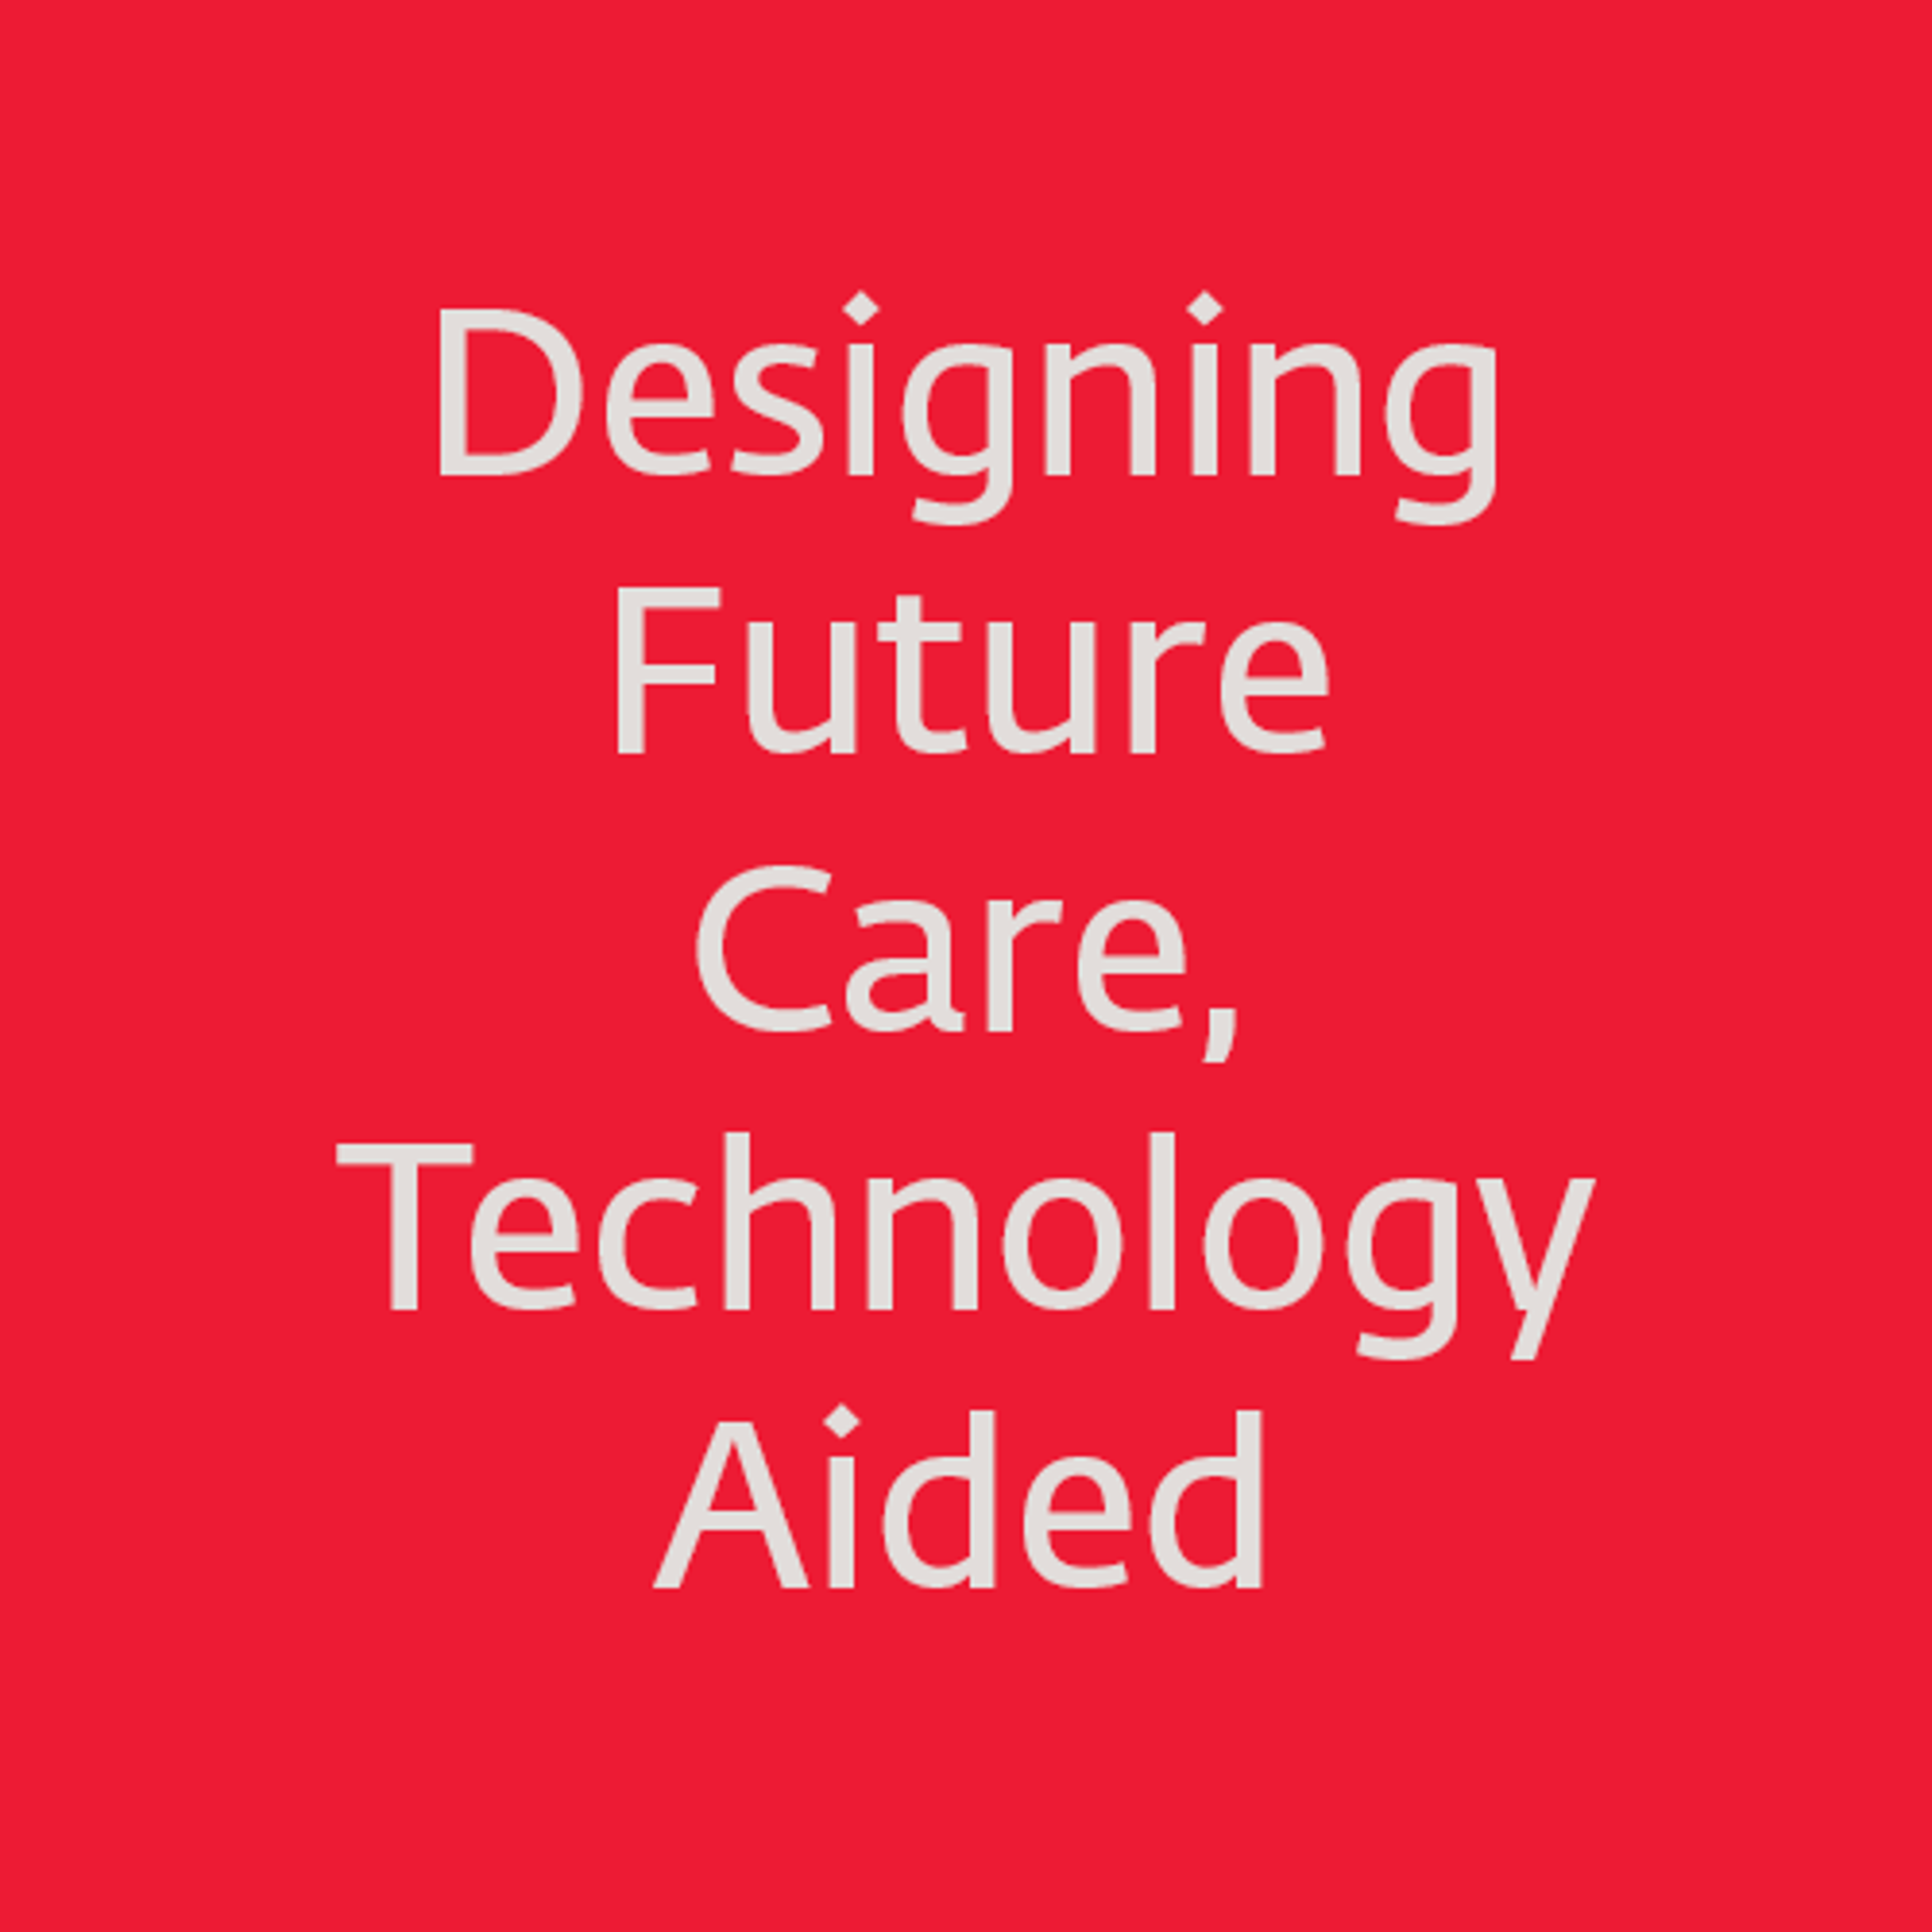 Designing Future Care, Technology Aided loading=